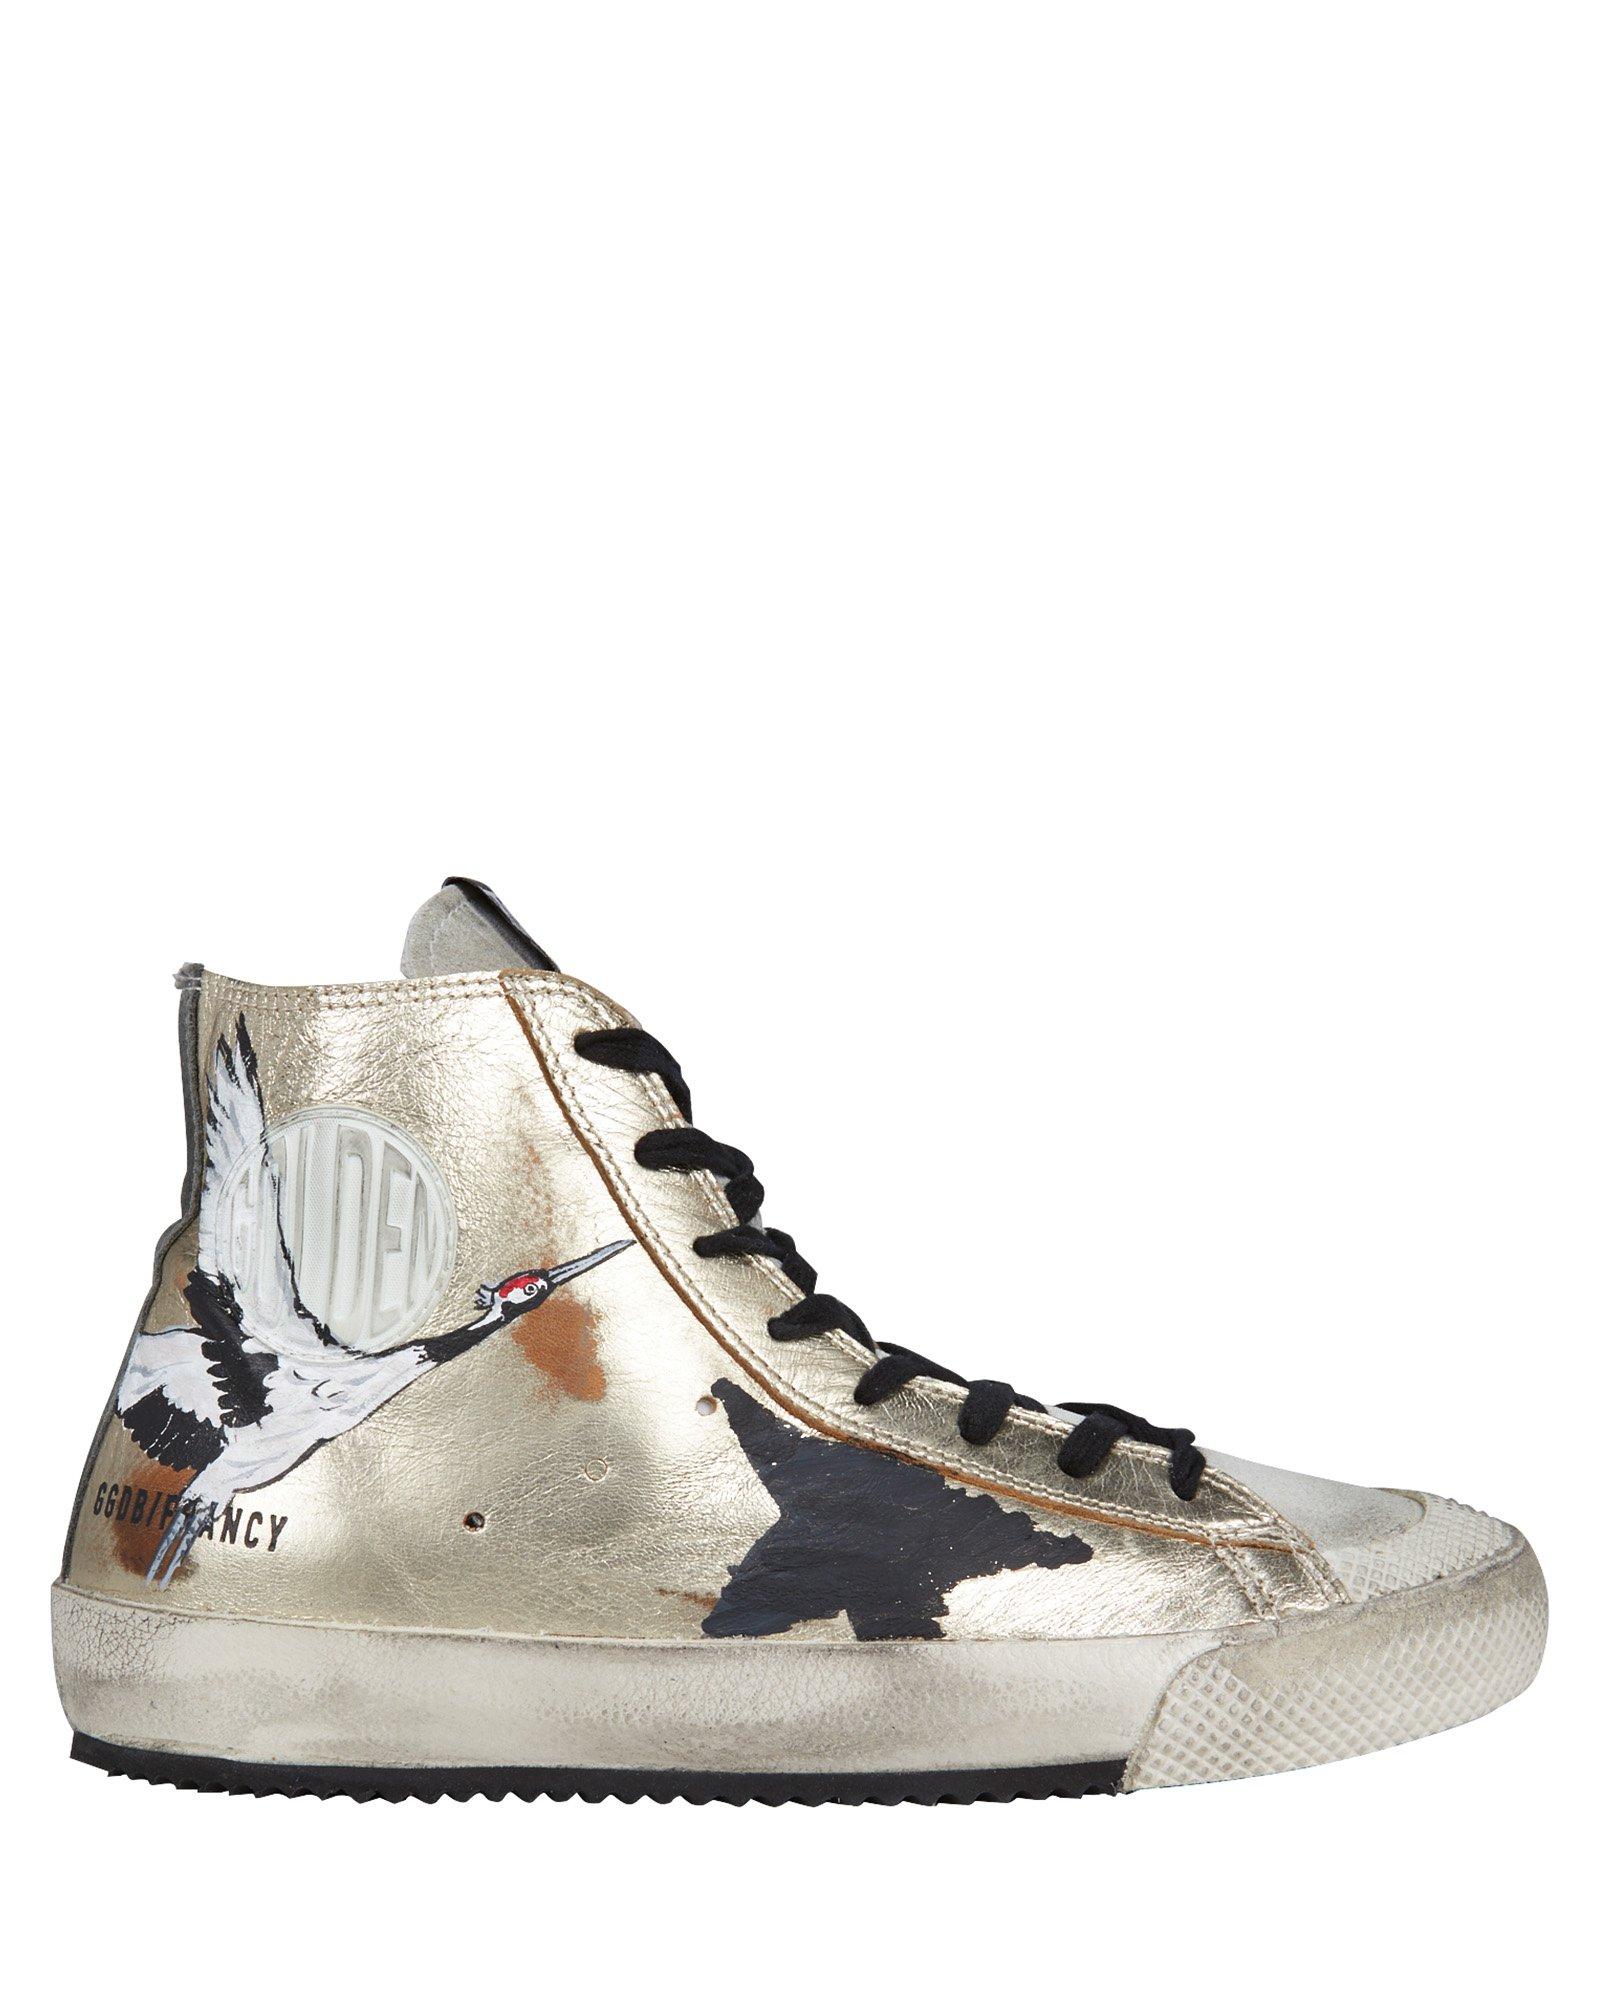 Golden Goose Deluxe Brand Francy High-top Painted Star Sneakers Gold ...